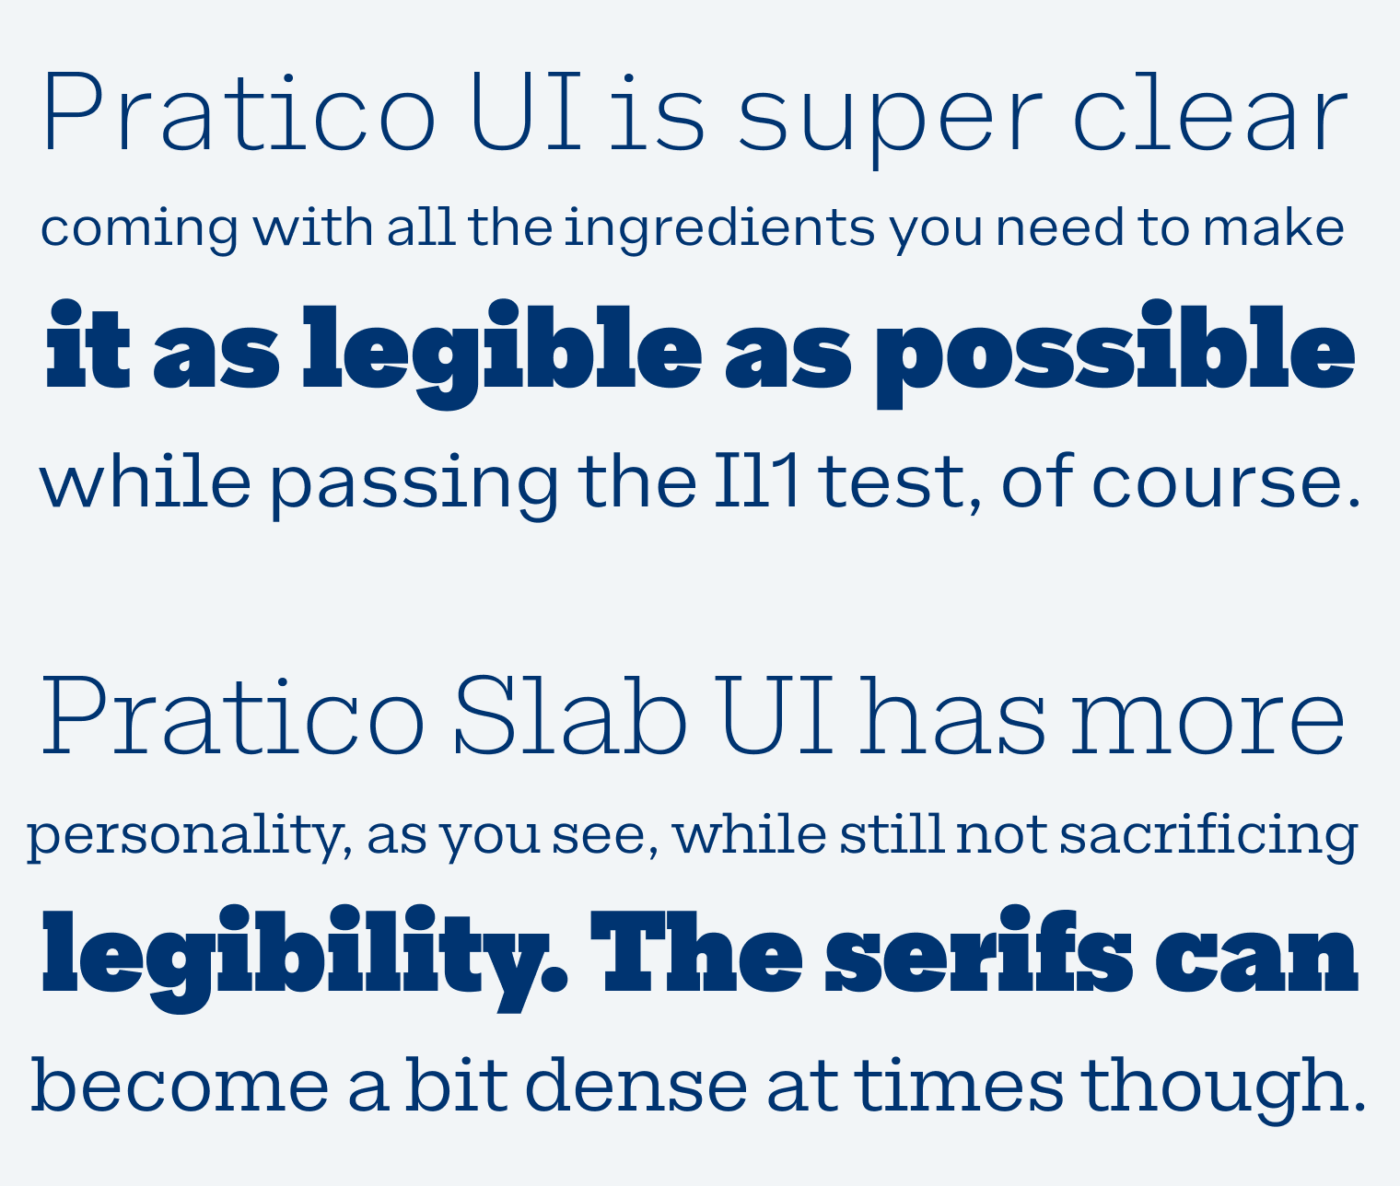 Pratico UI is super clear, coming with all the ingredients you need to make it as legible as possible while passing the Il1 test, of course. Pratico Slab UI has more personality, as you see, while still not sacrificing legibility. The serifs can become a bit dense at times though.